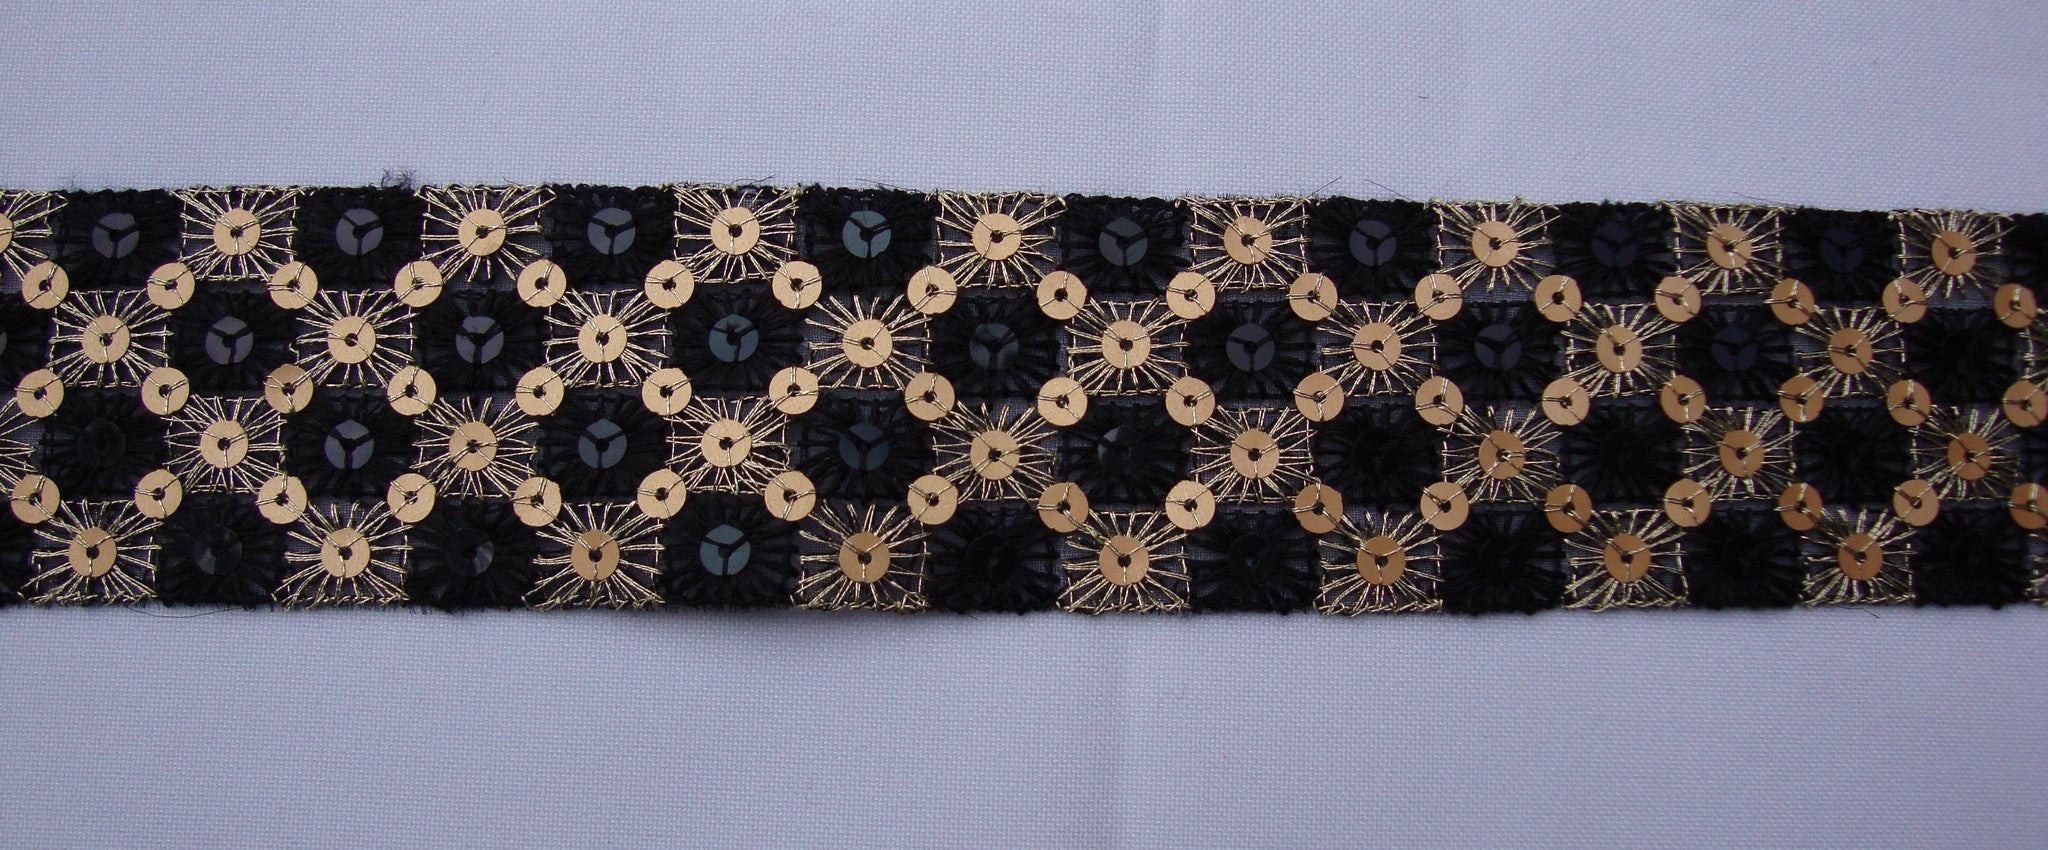 Black & Gold Sequin Trimming (Sold as a 2 yard piece)